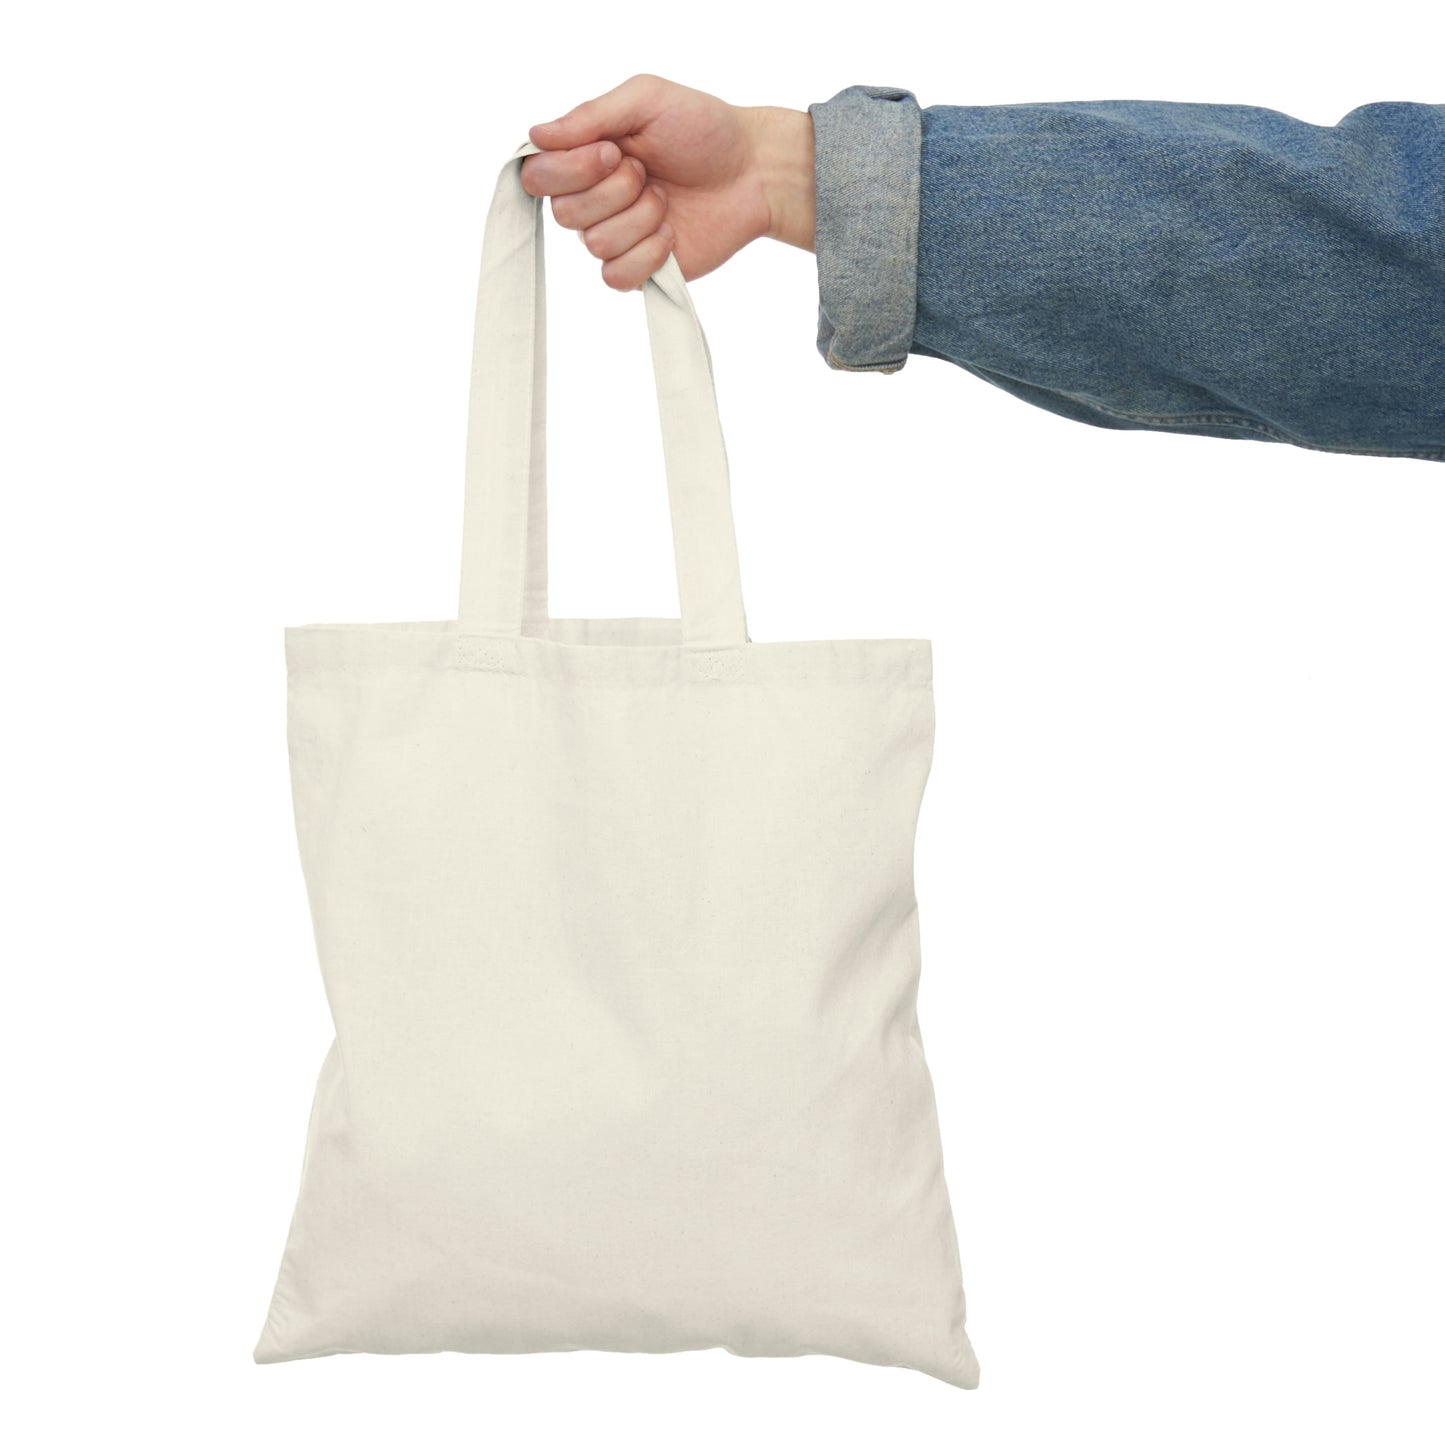 A Trip to the Hardware Store & Other Calamities - Natural Tote Bag